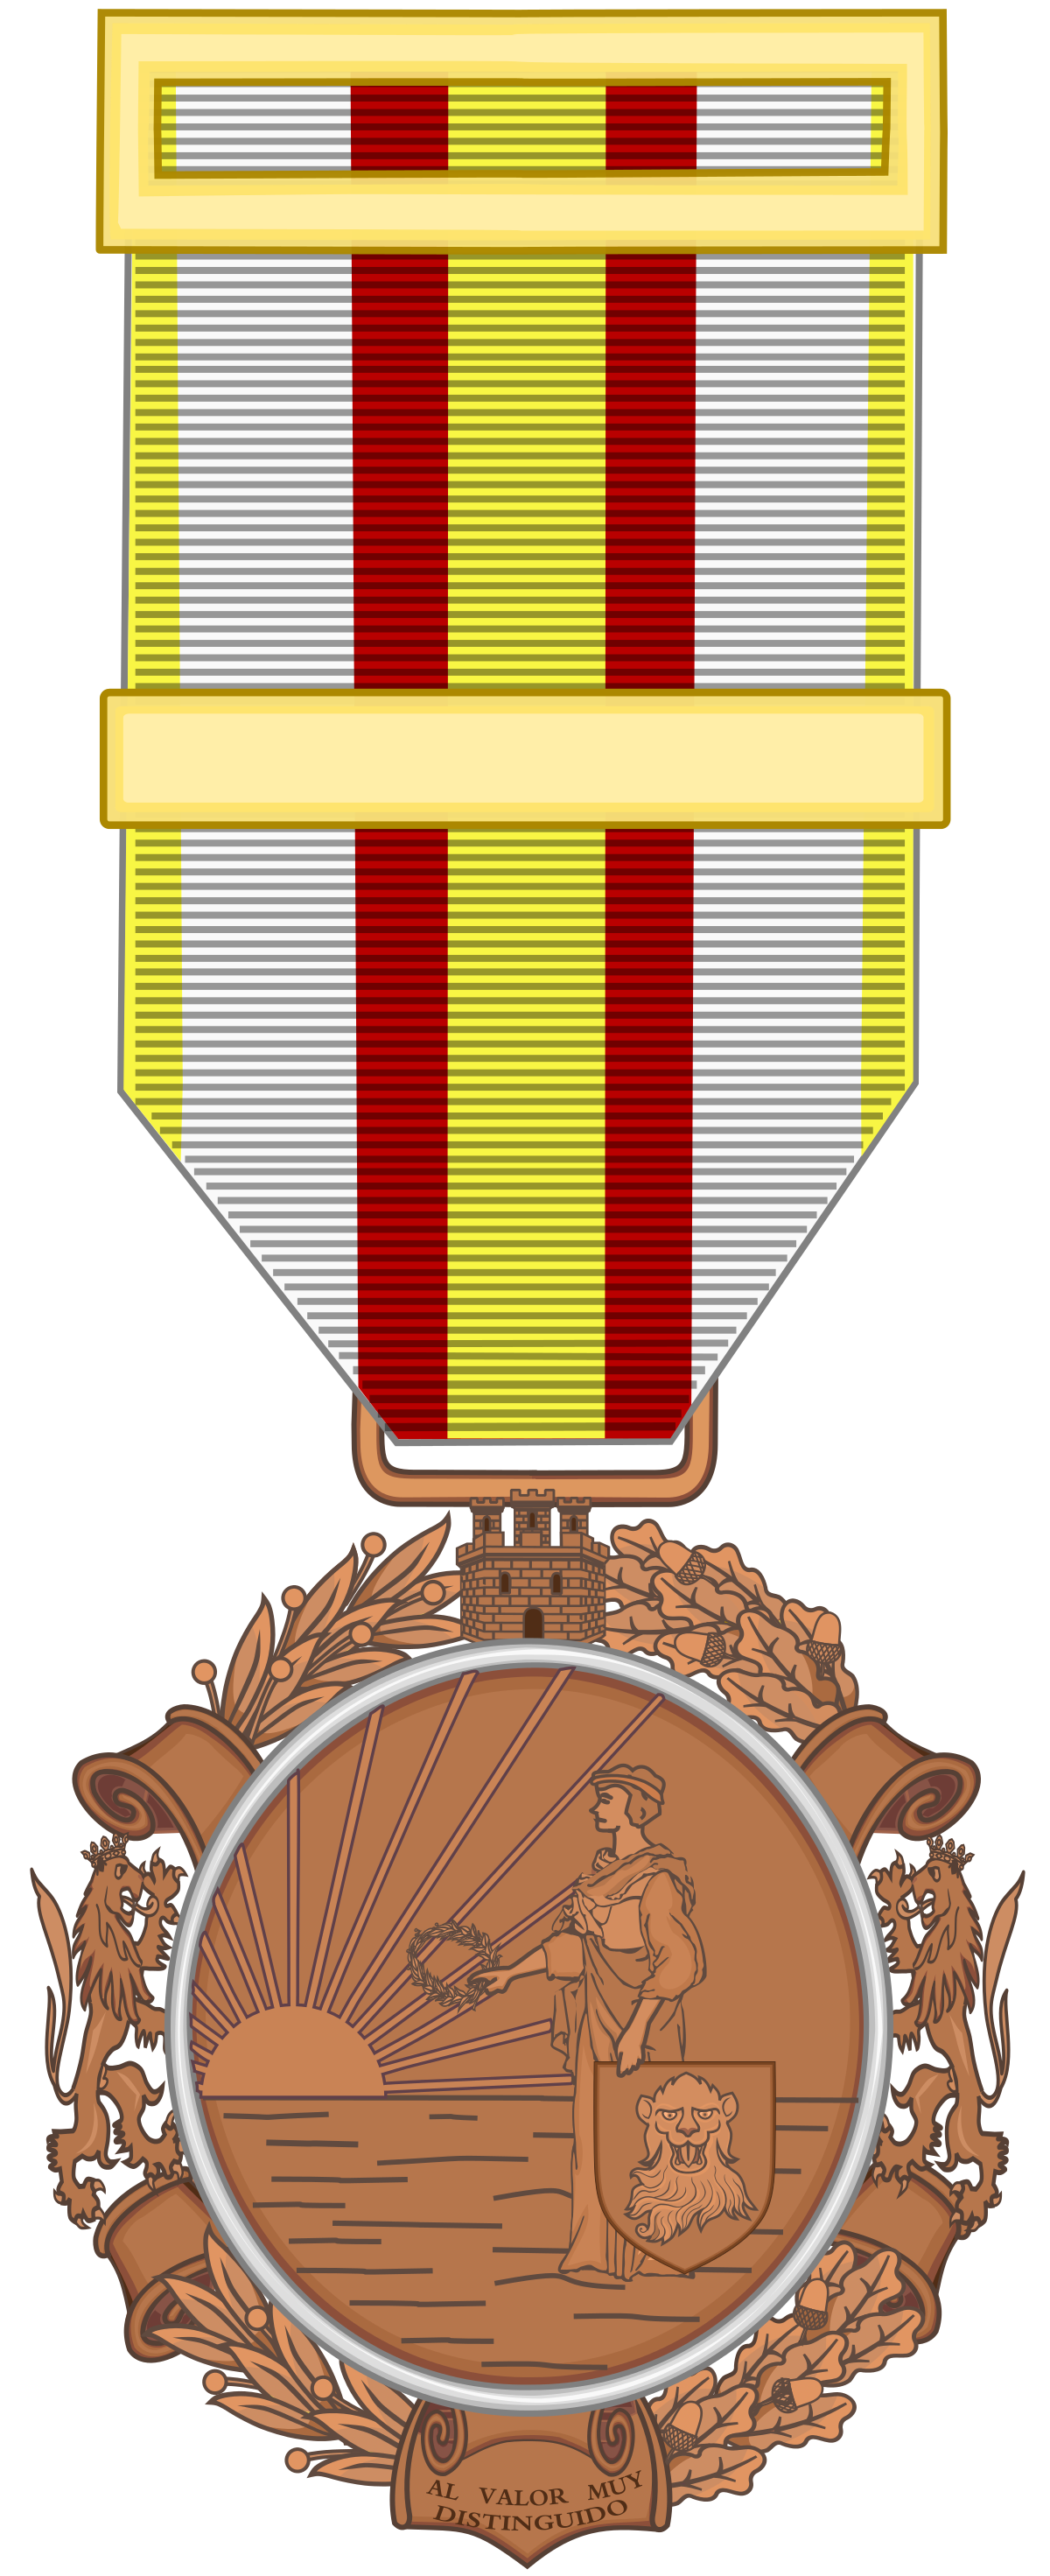 Military spain wikipedia . Medal clipart army medal